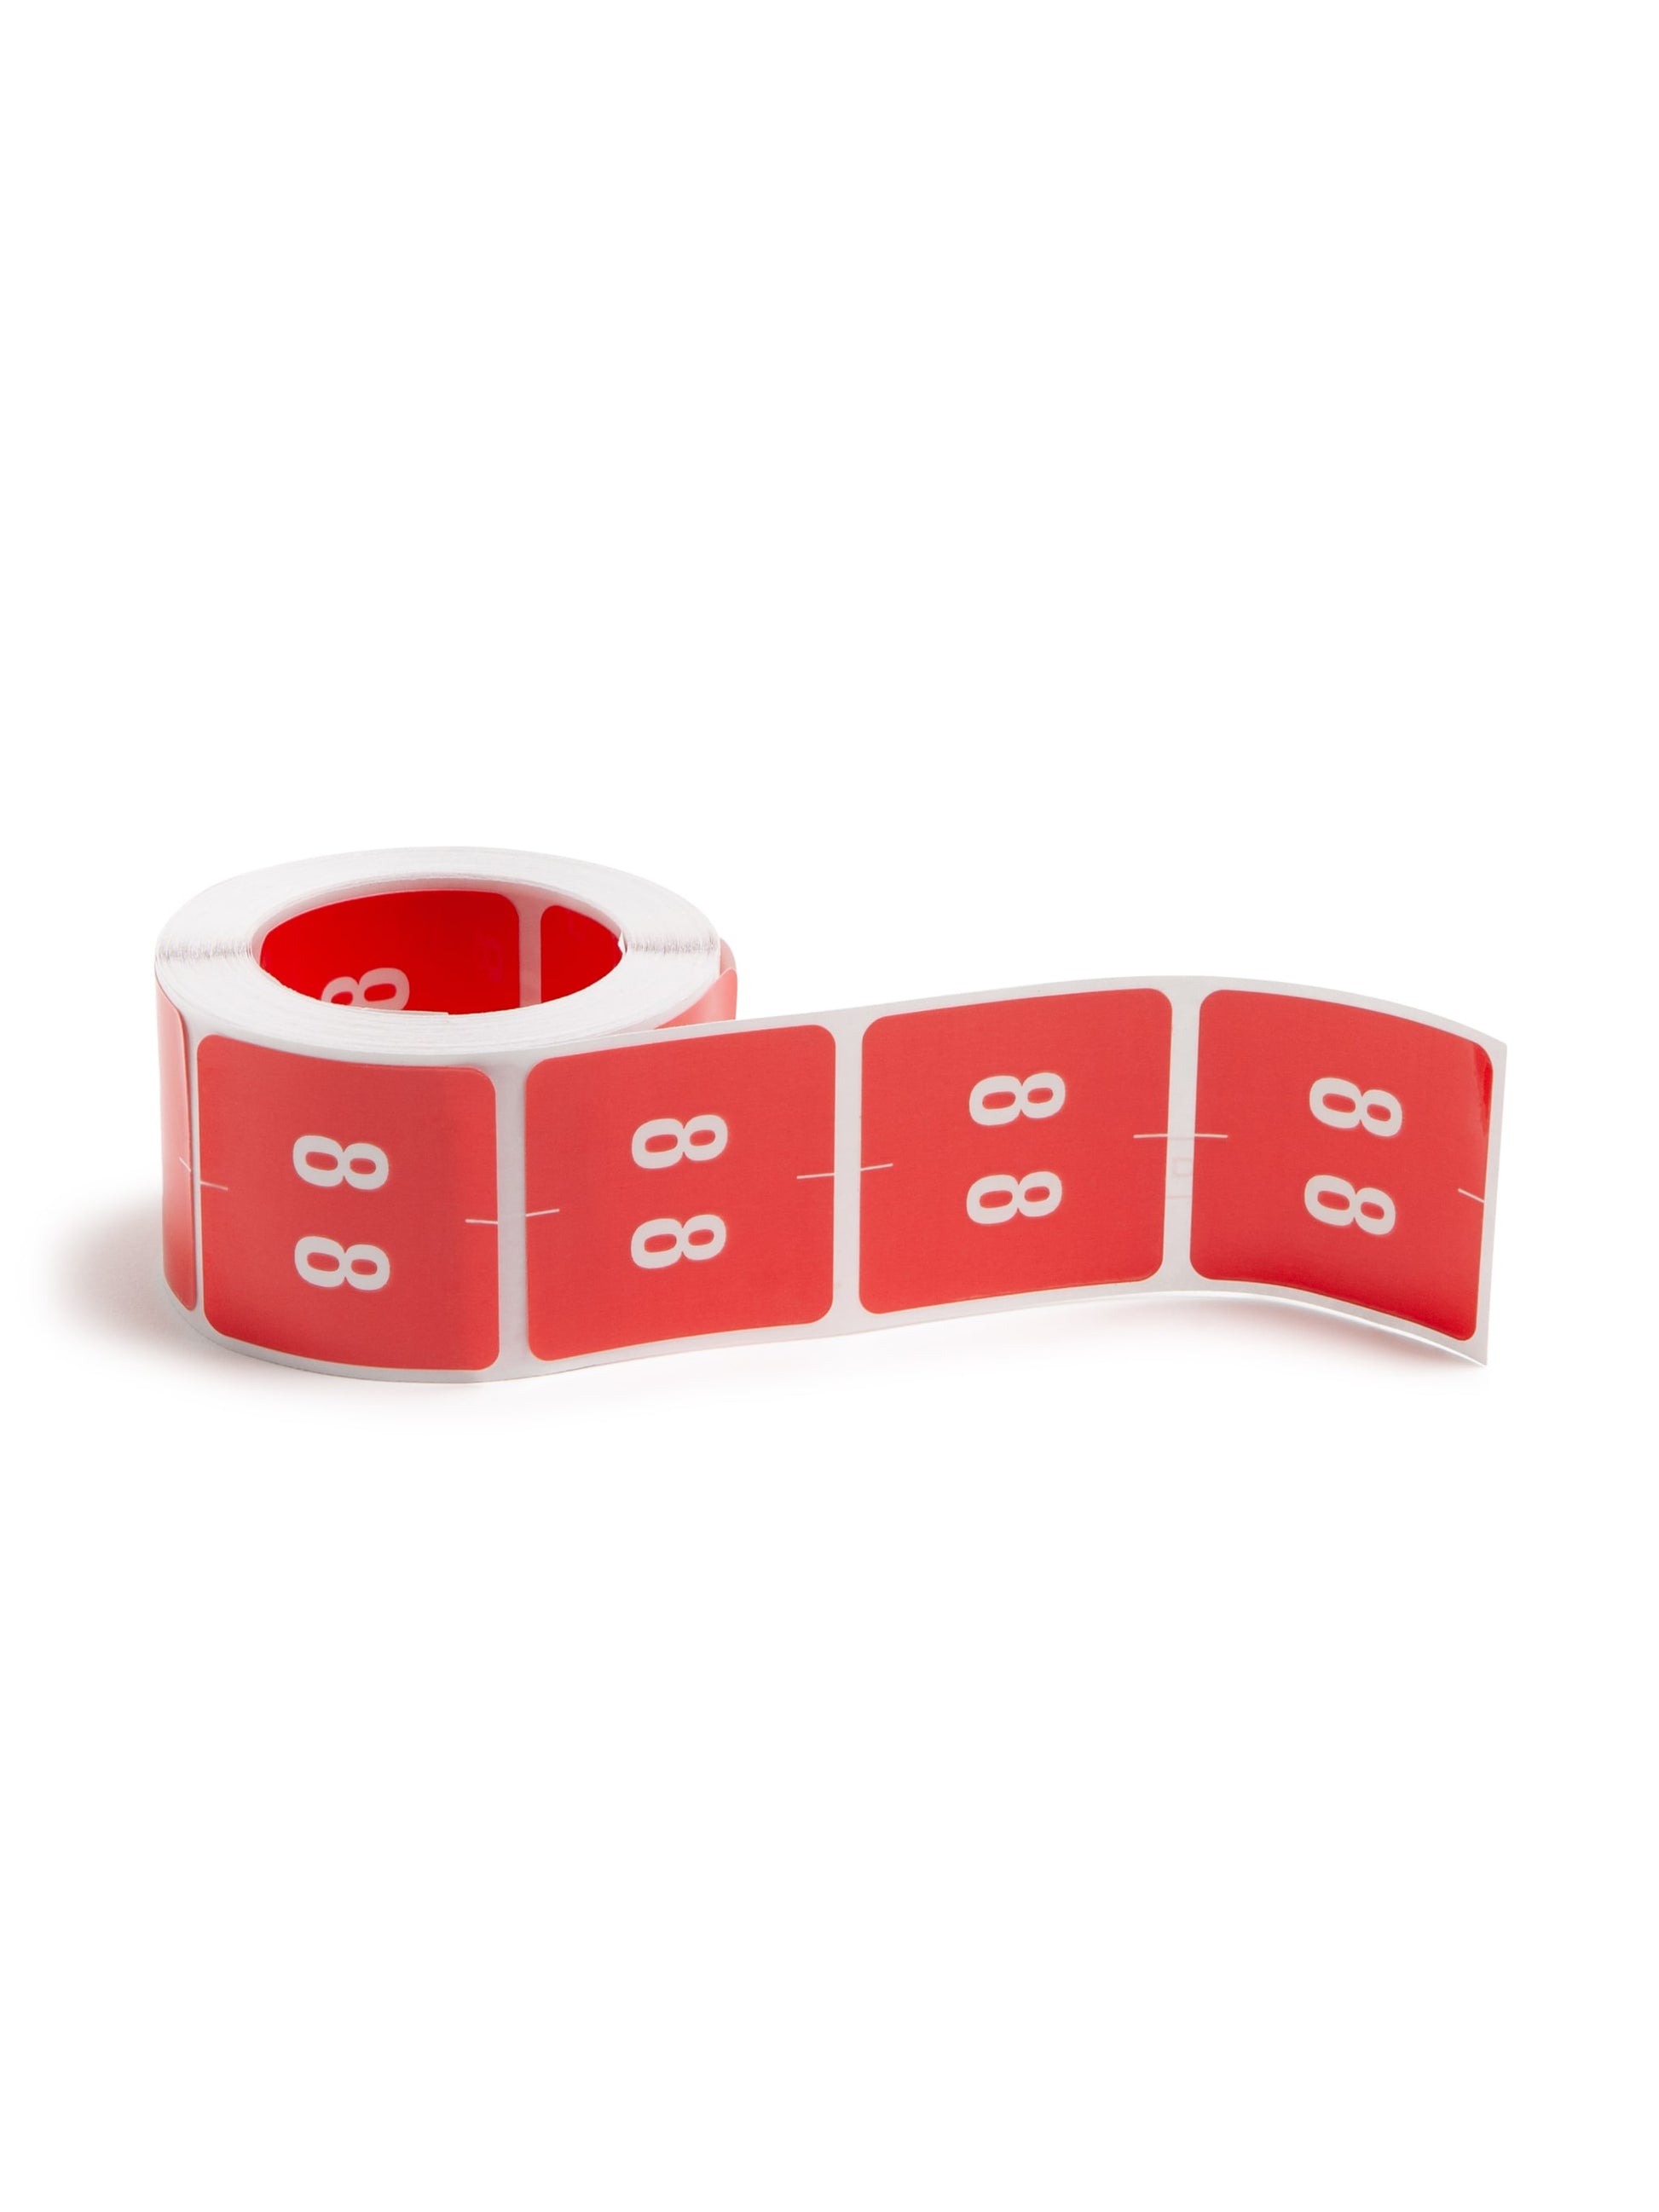 DCC Color-Coded Numeric Labels - Rolls, Red Color, 1-1/2" X 1-1/2" Size, Set of 1, 086486674287